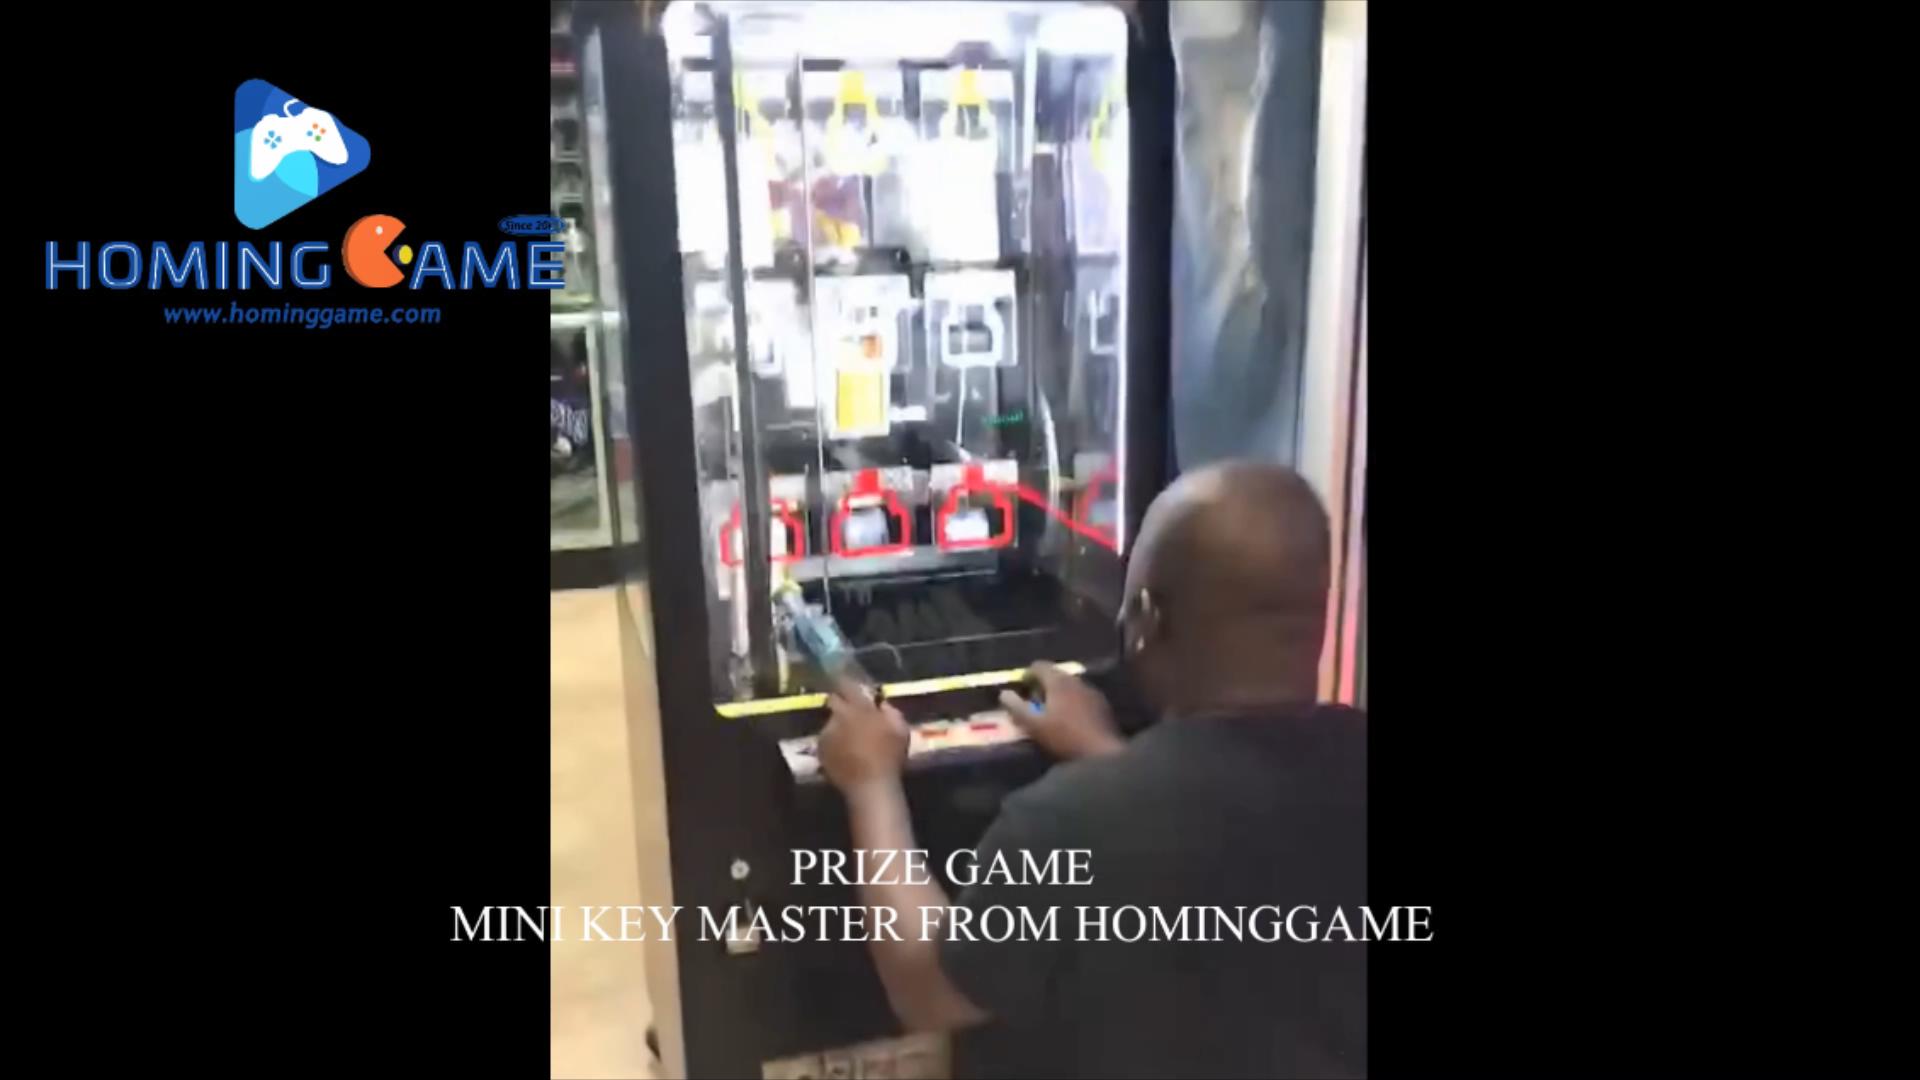 2020 Trinida Customer Win the BIg Prize from HomingGame Mini Key master Arcade Prize Redemption Game Machine(Order call whatsapp:+8618688409495),Black Color Mini Key Master Game Machine|keymaster|key master arcade game machine|key master game machine price|key master game machine for sale|claw machine|claw machines|claw machine win|key master win|Game Machine|Arcade Game Machine|Coin Operated Game Machine|Amusement Park Game Equipment |indoor game machine|Prize Redemption Game Machine